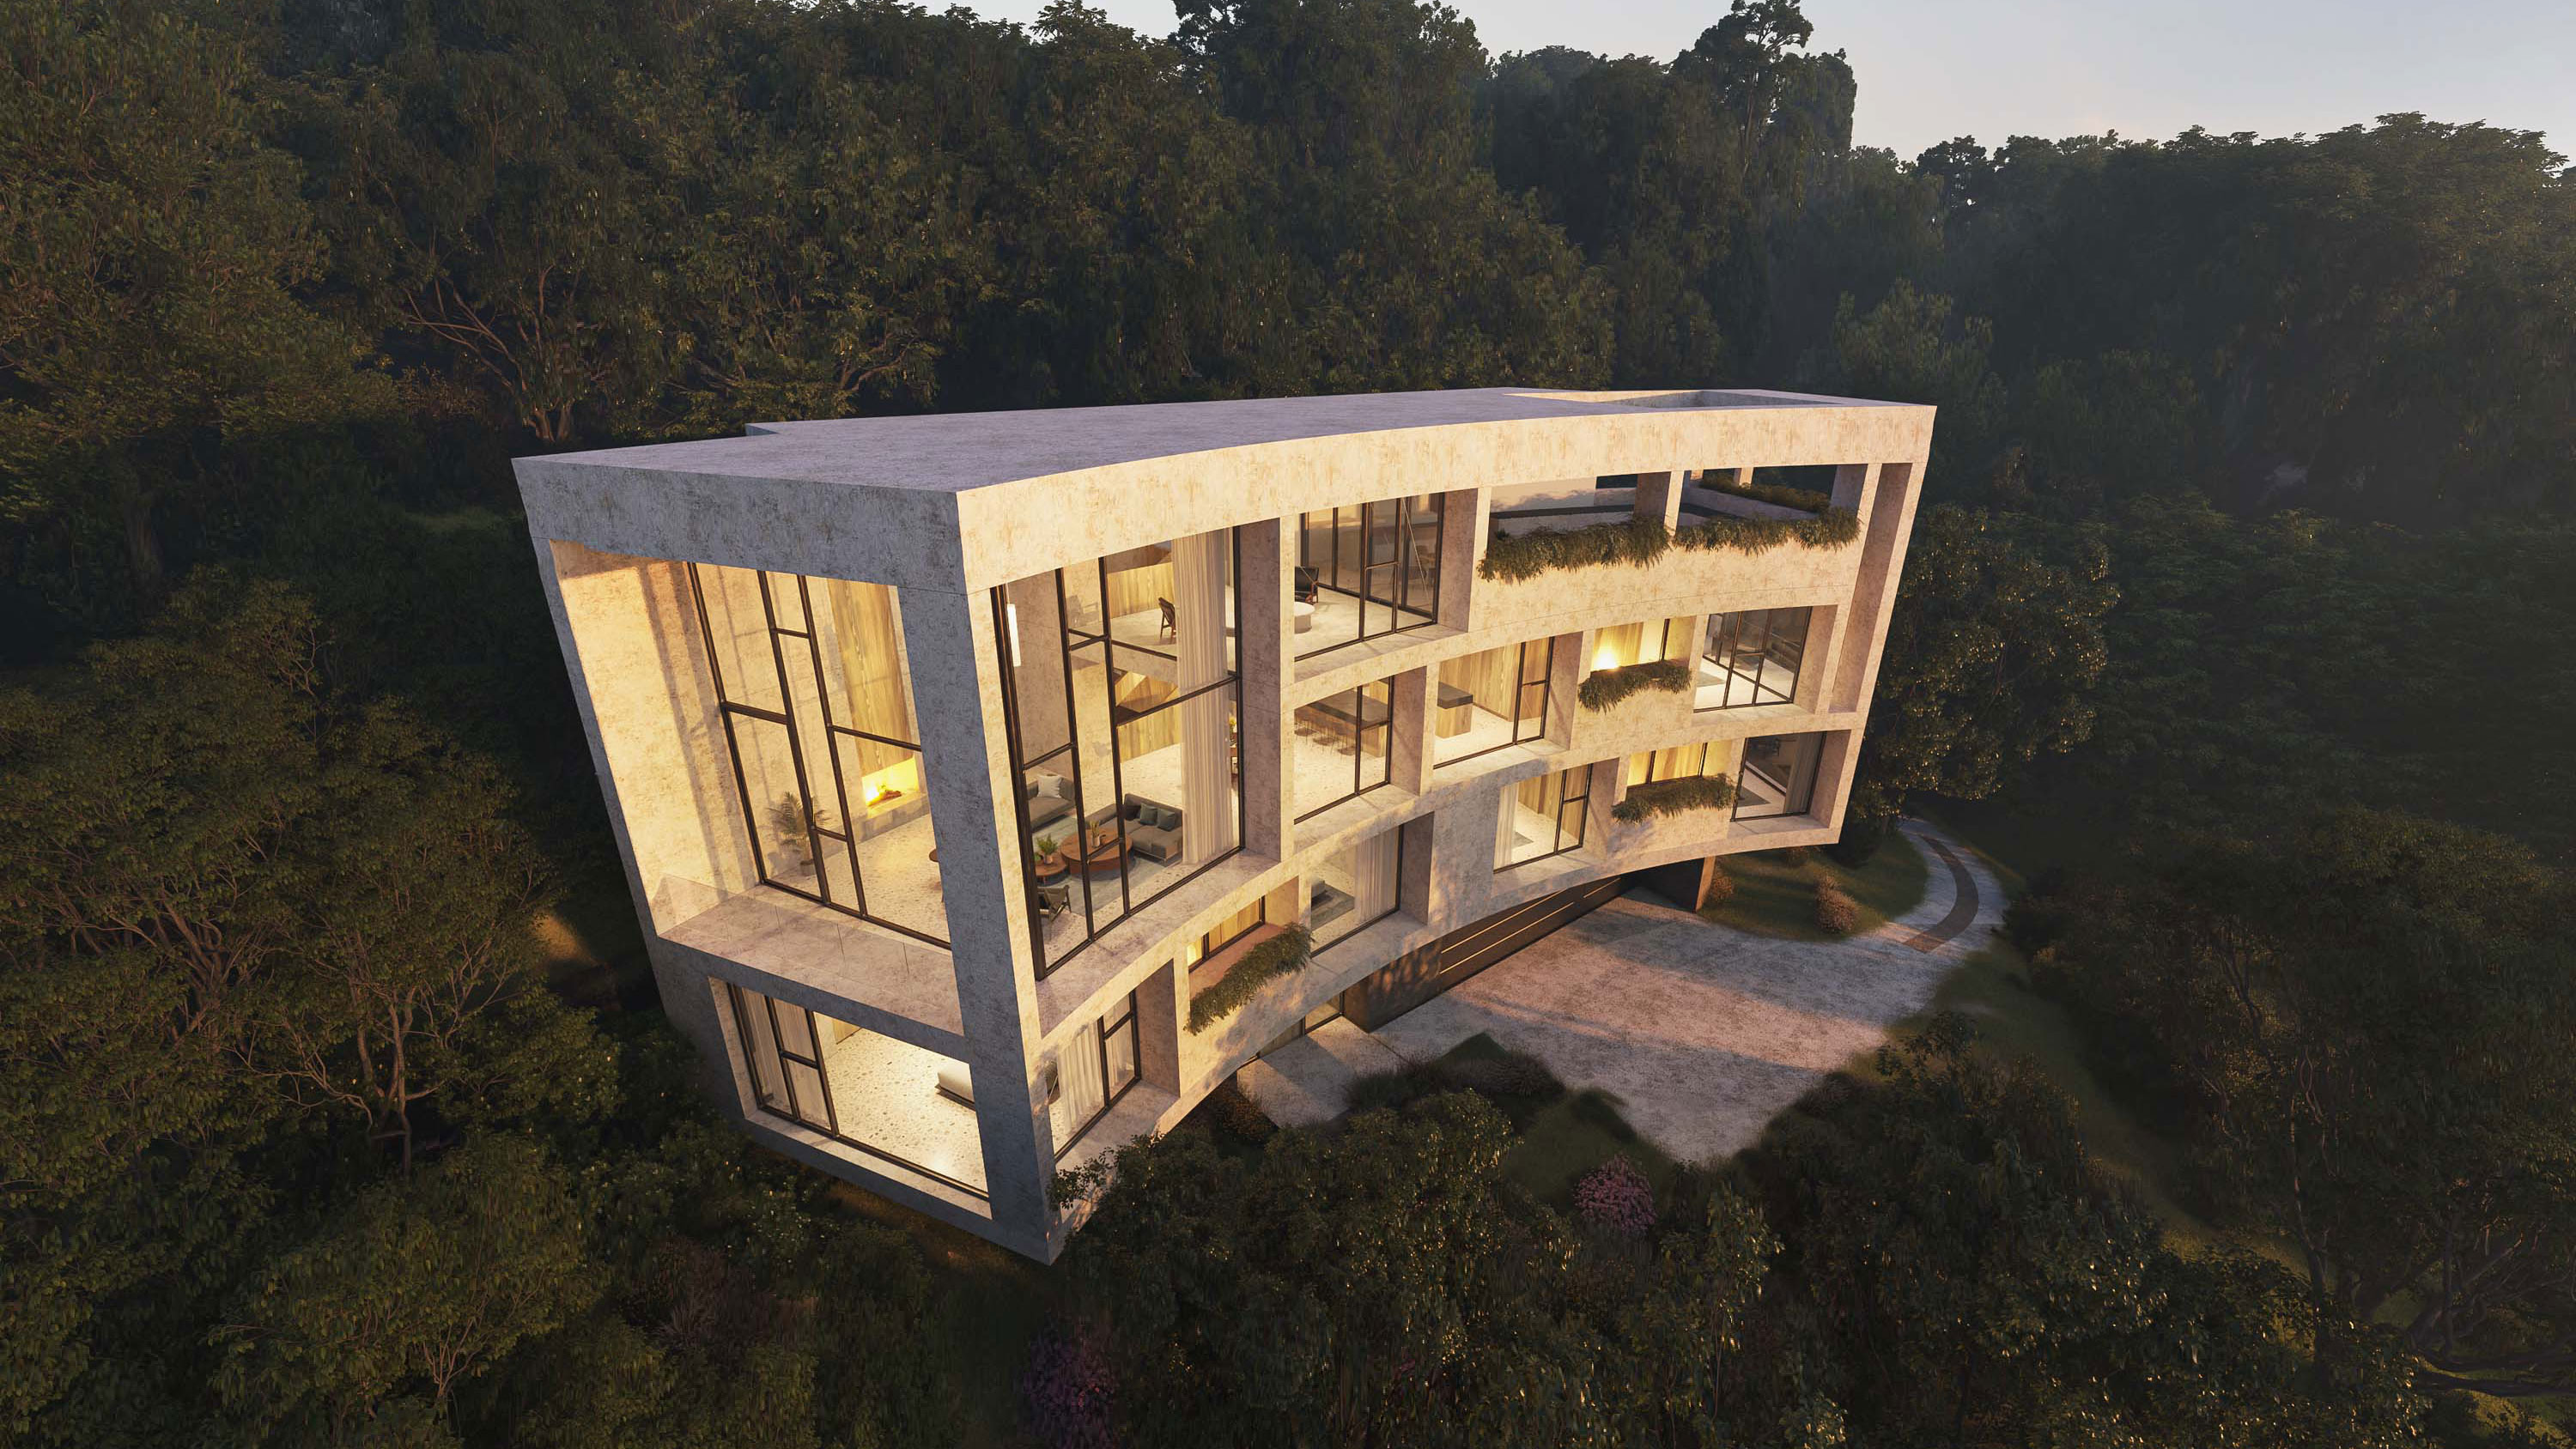 Exterior rendering of Samsara Arc House by Specht Novak Architects showcasing the entirely concrete structure appearing to be a single monolithic piece.